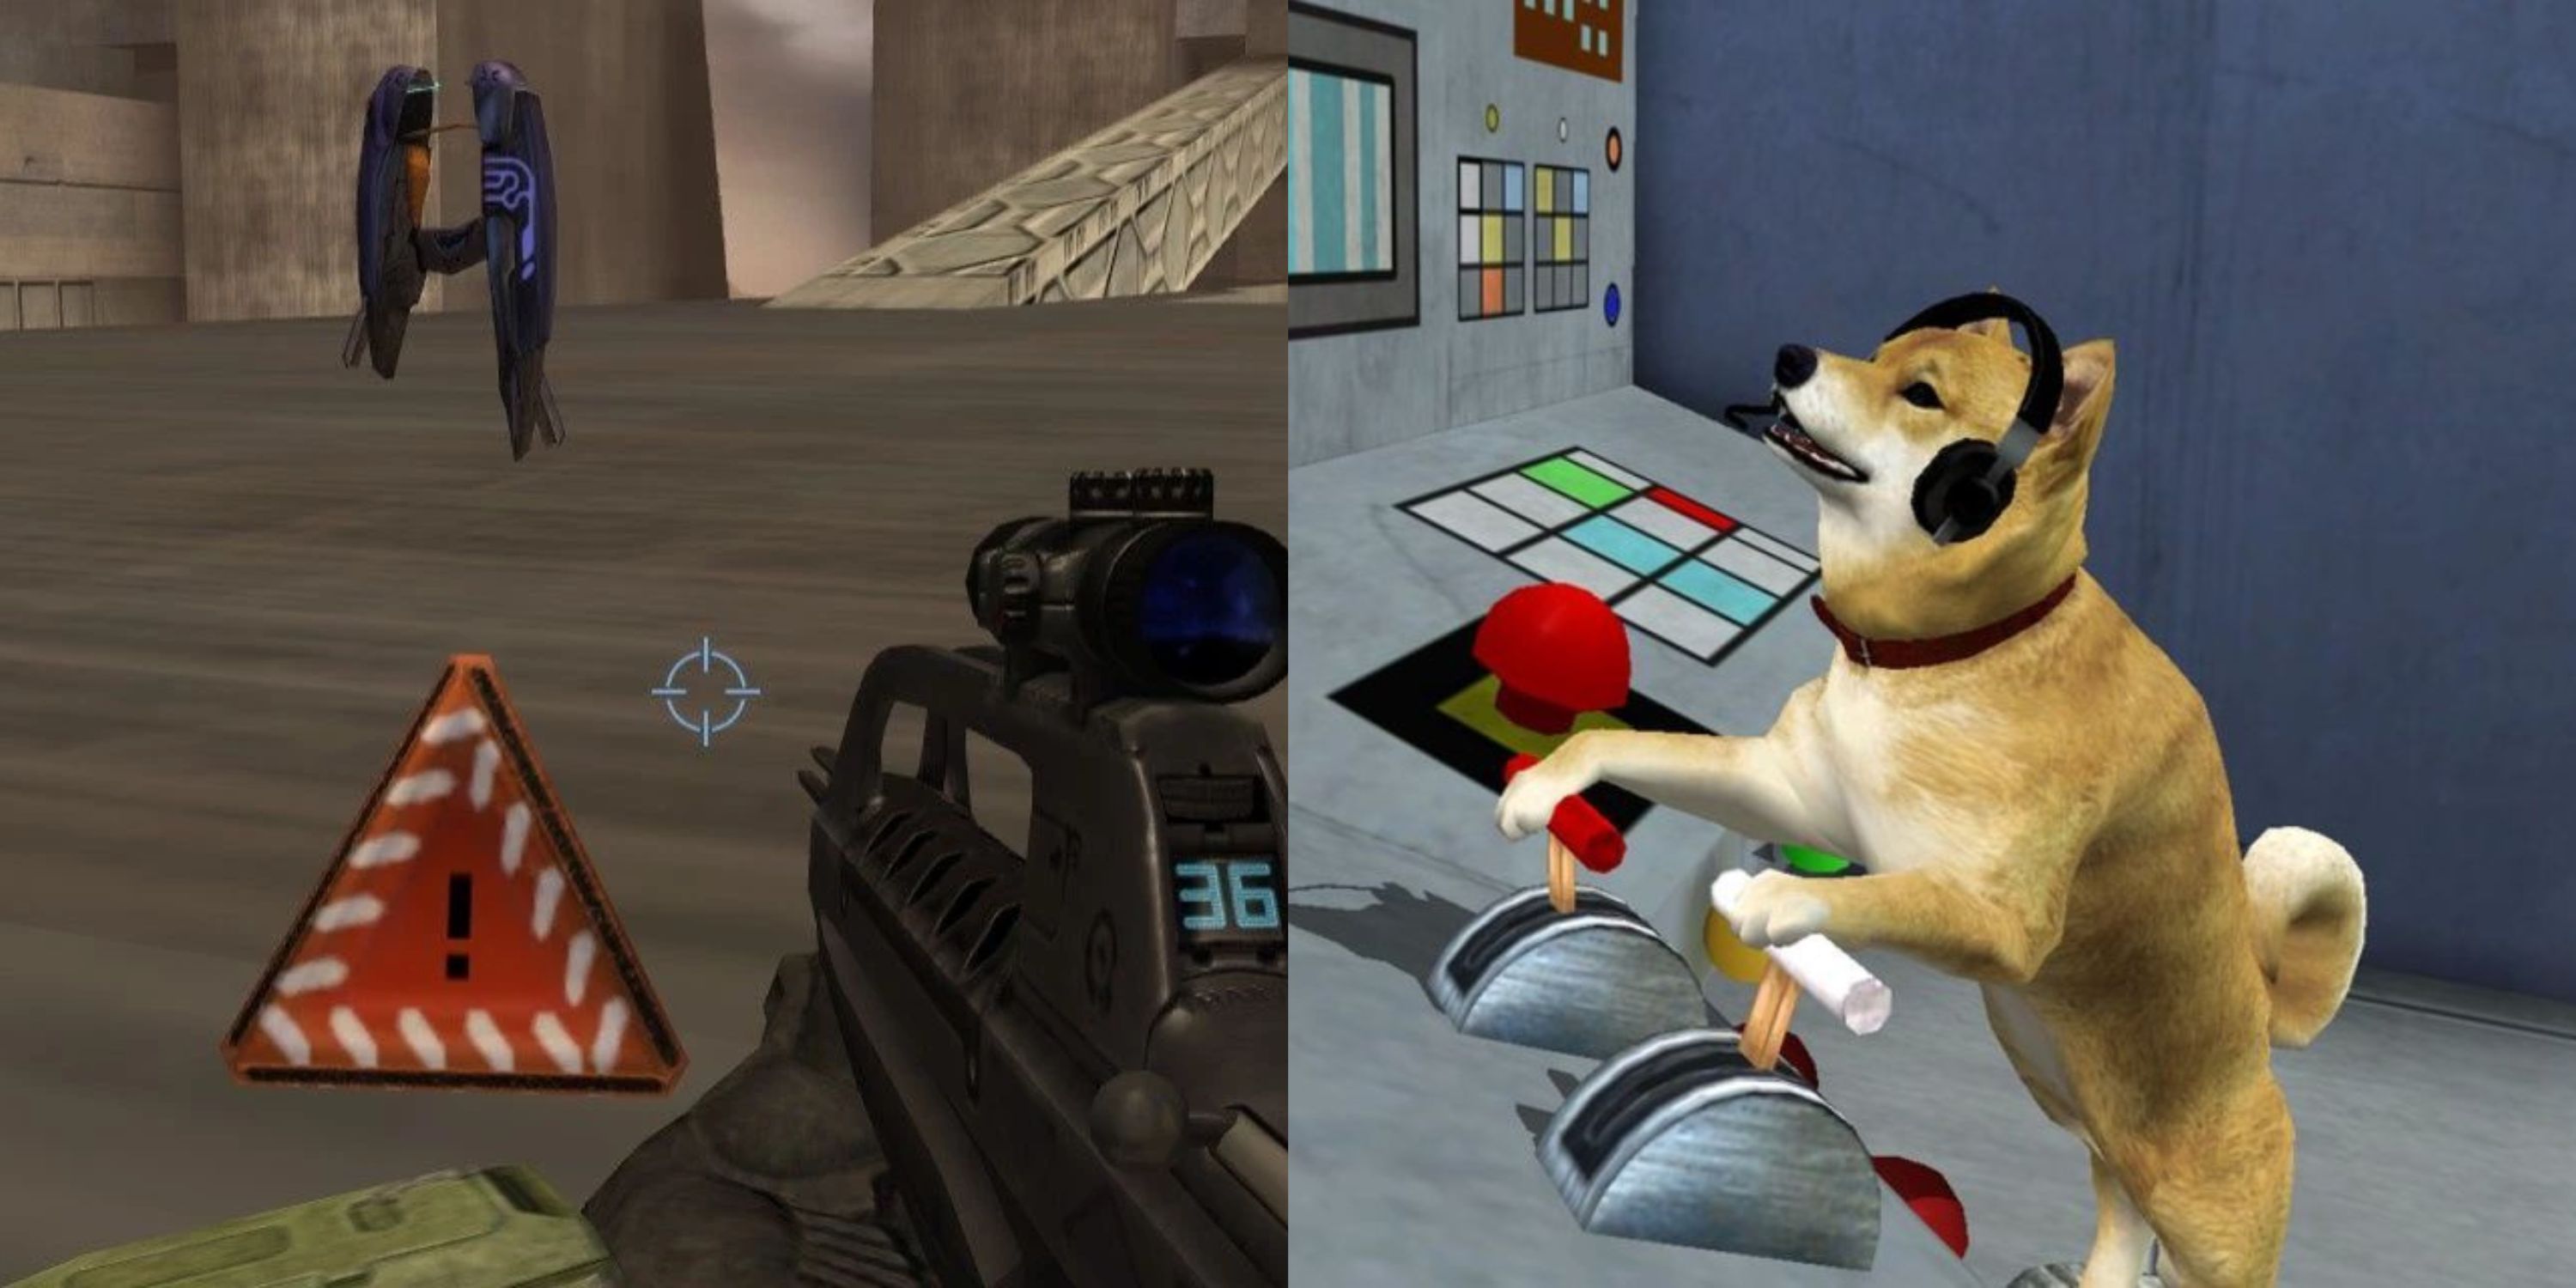 The 10 Best Video Game Easter Eggs Of All Time, According To Reddit